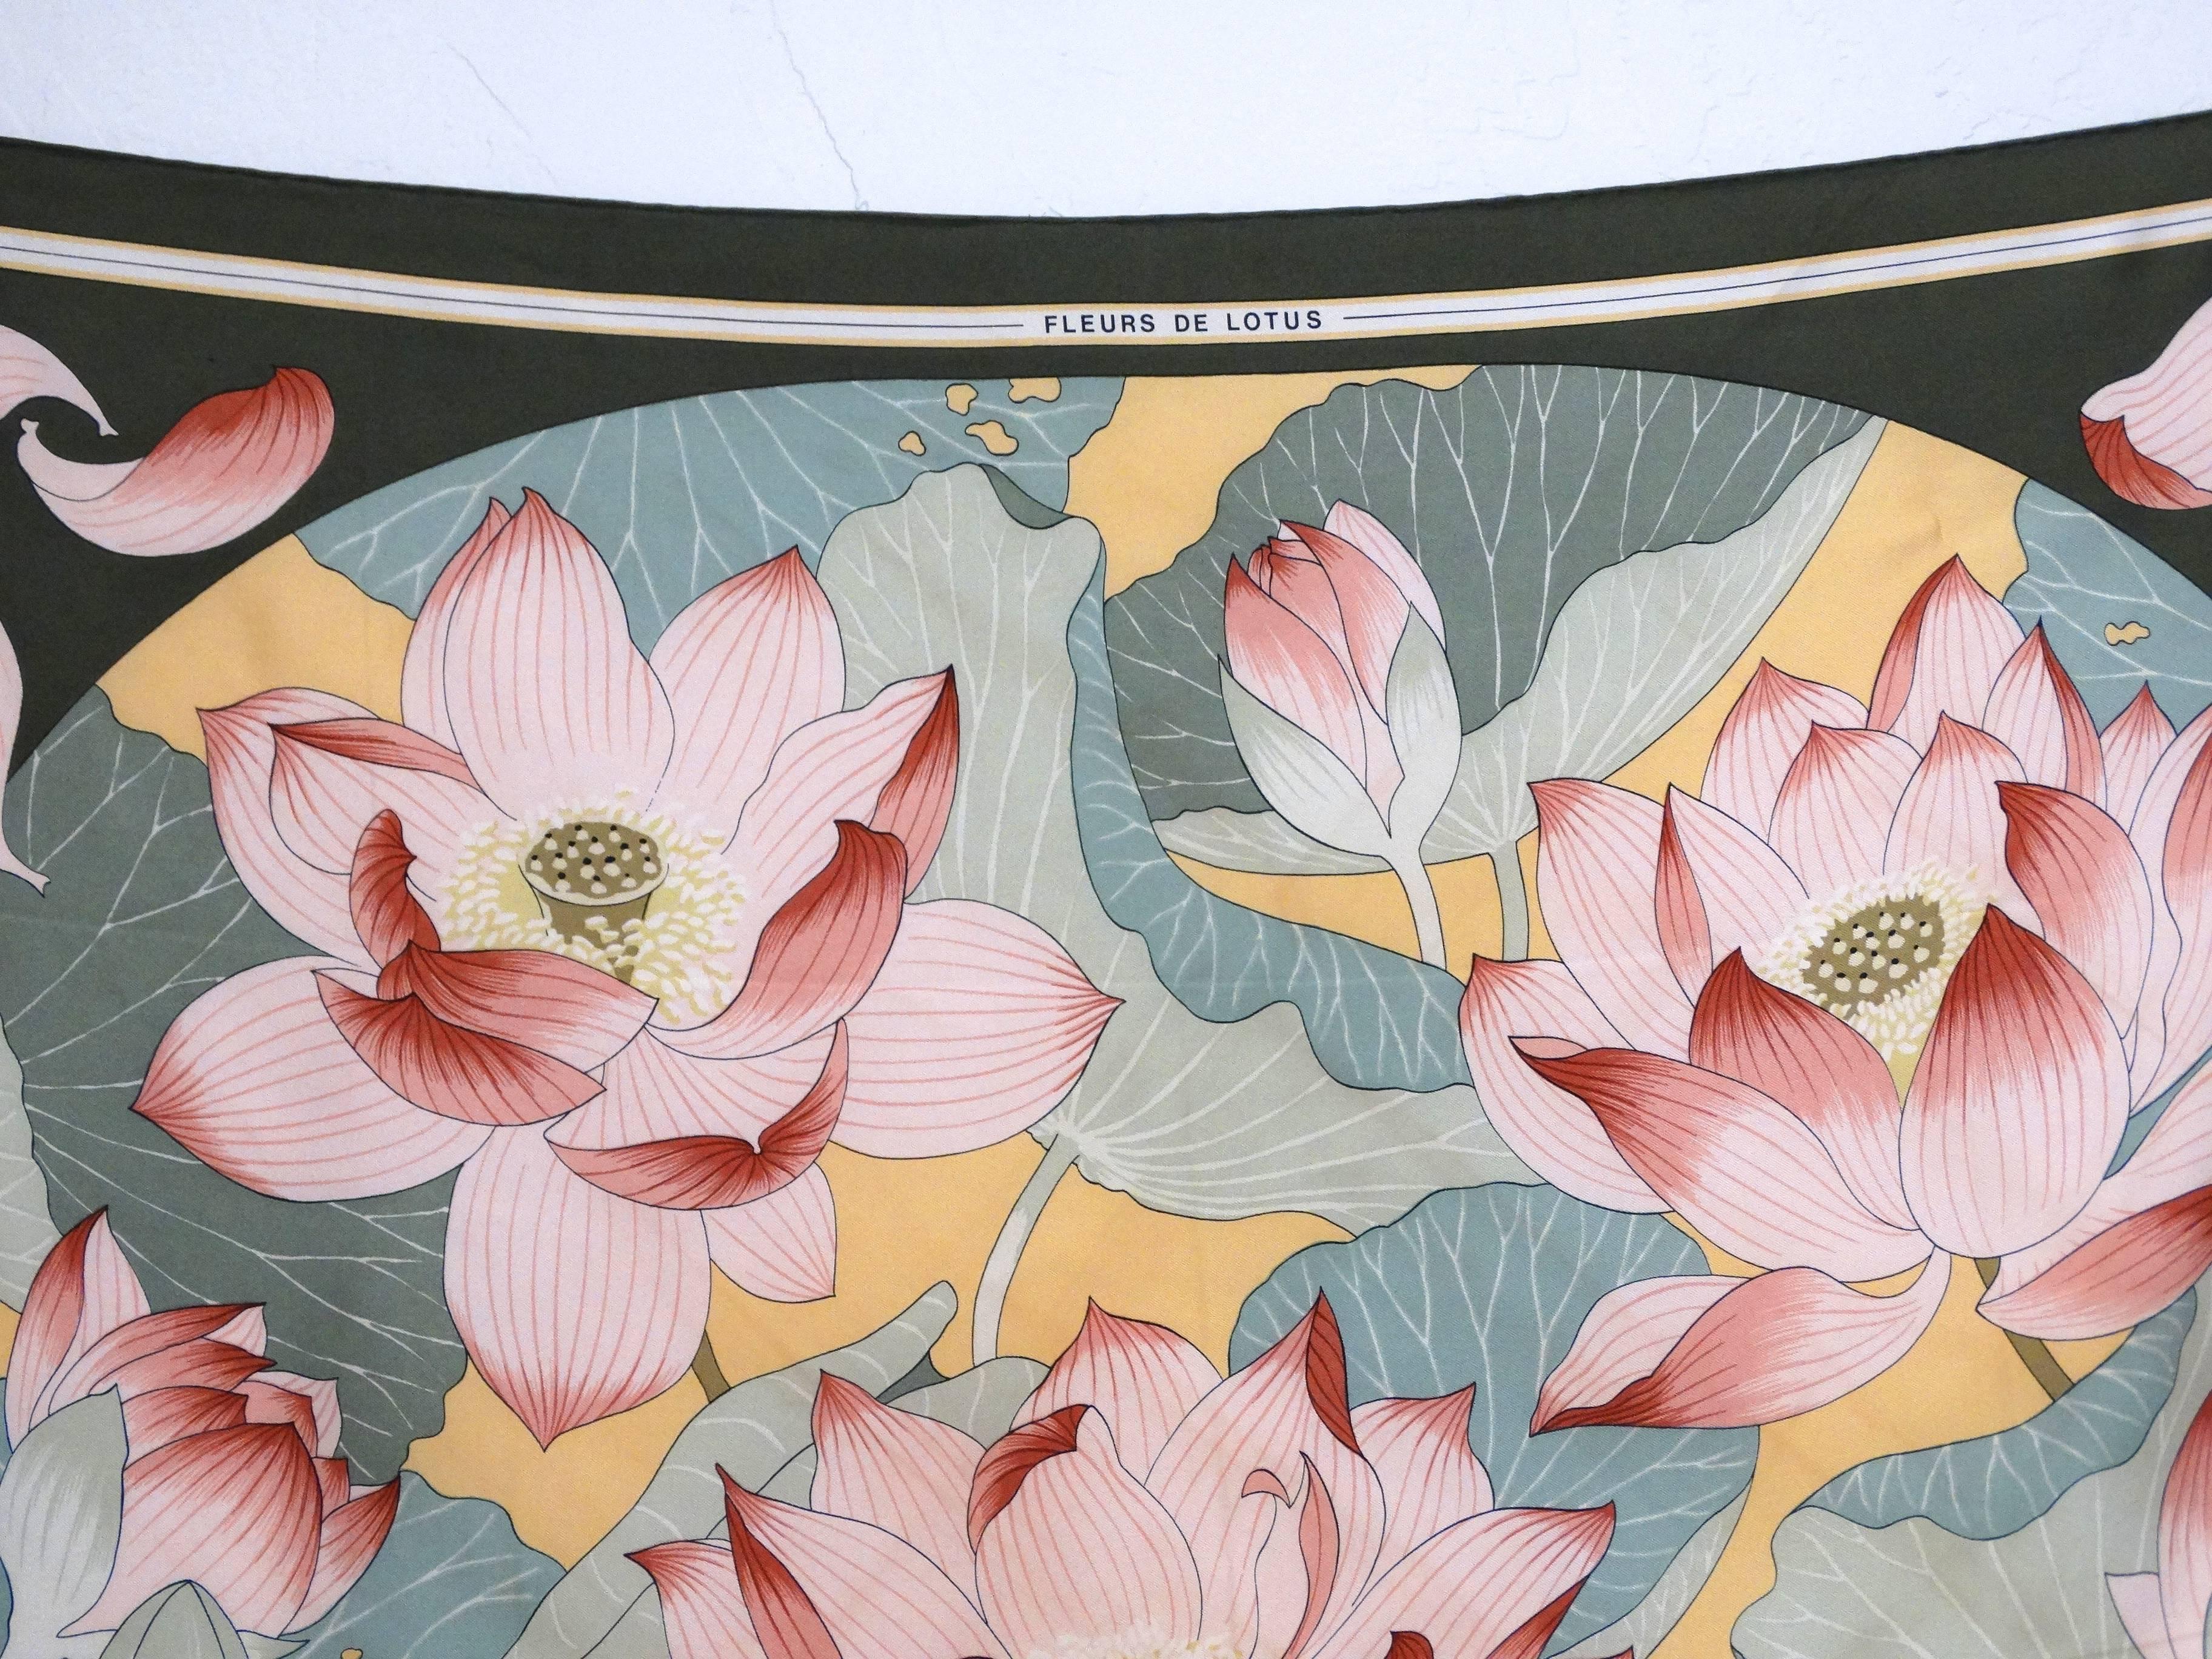 First designed in 1976, this beautiful silk Fleurs de Lotus created by Christiane Vauzelles for Hermes in the early 80's is divine. It depicts beautiful Lotus flowers, in variations of green, pink and white colors. The scarf is 100%